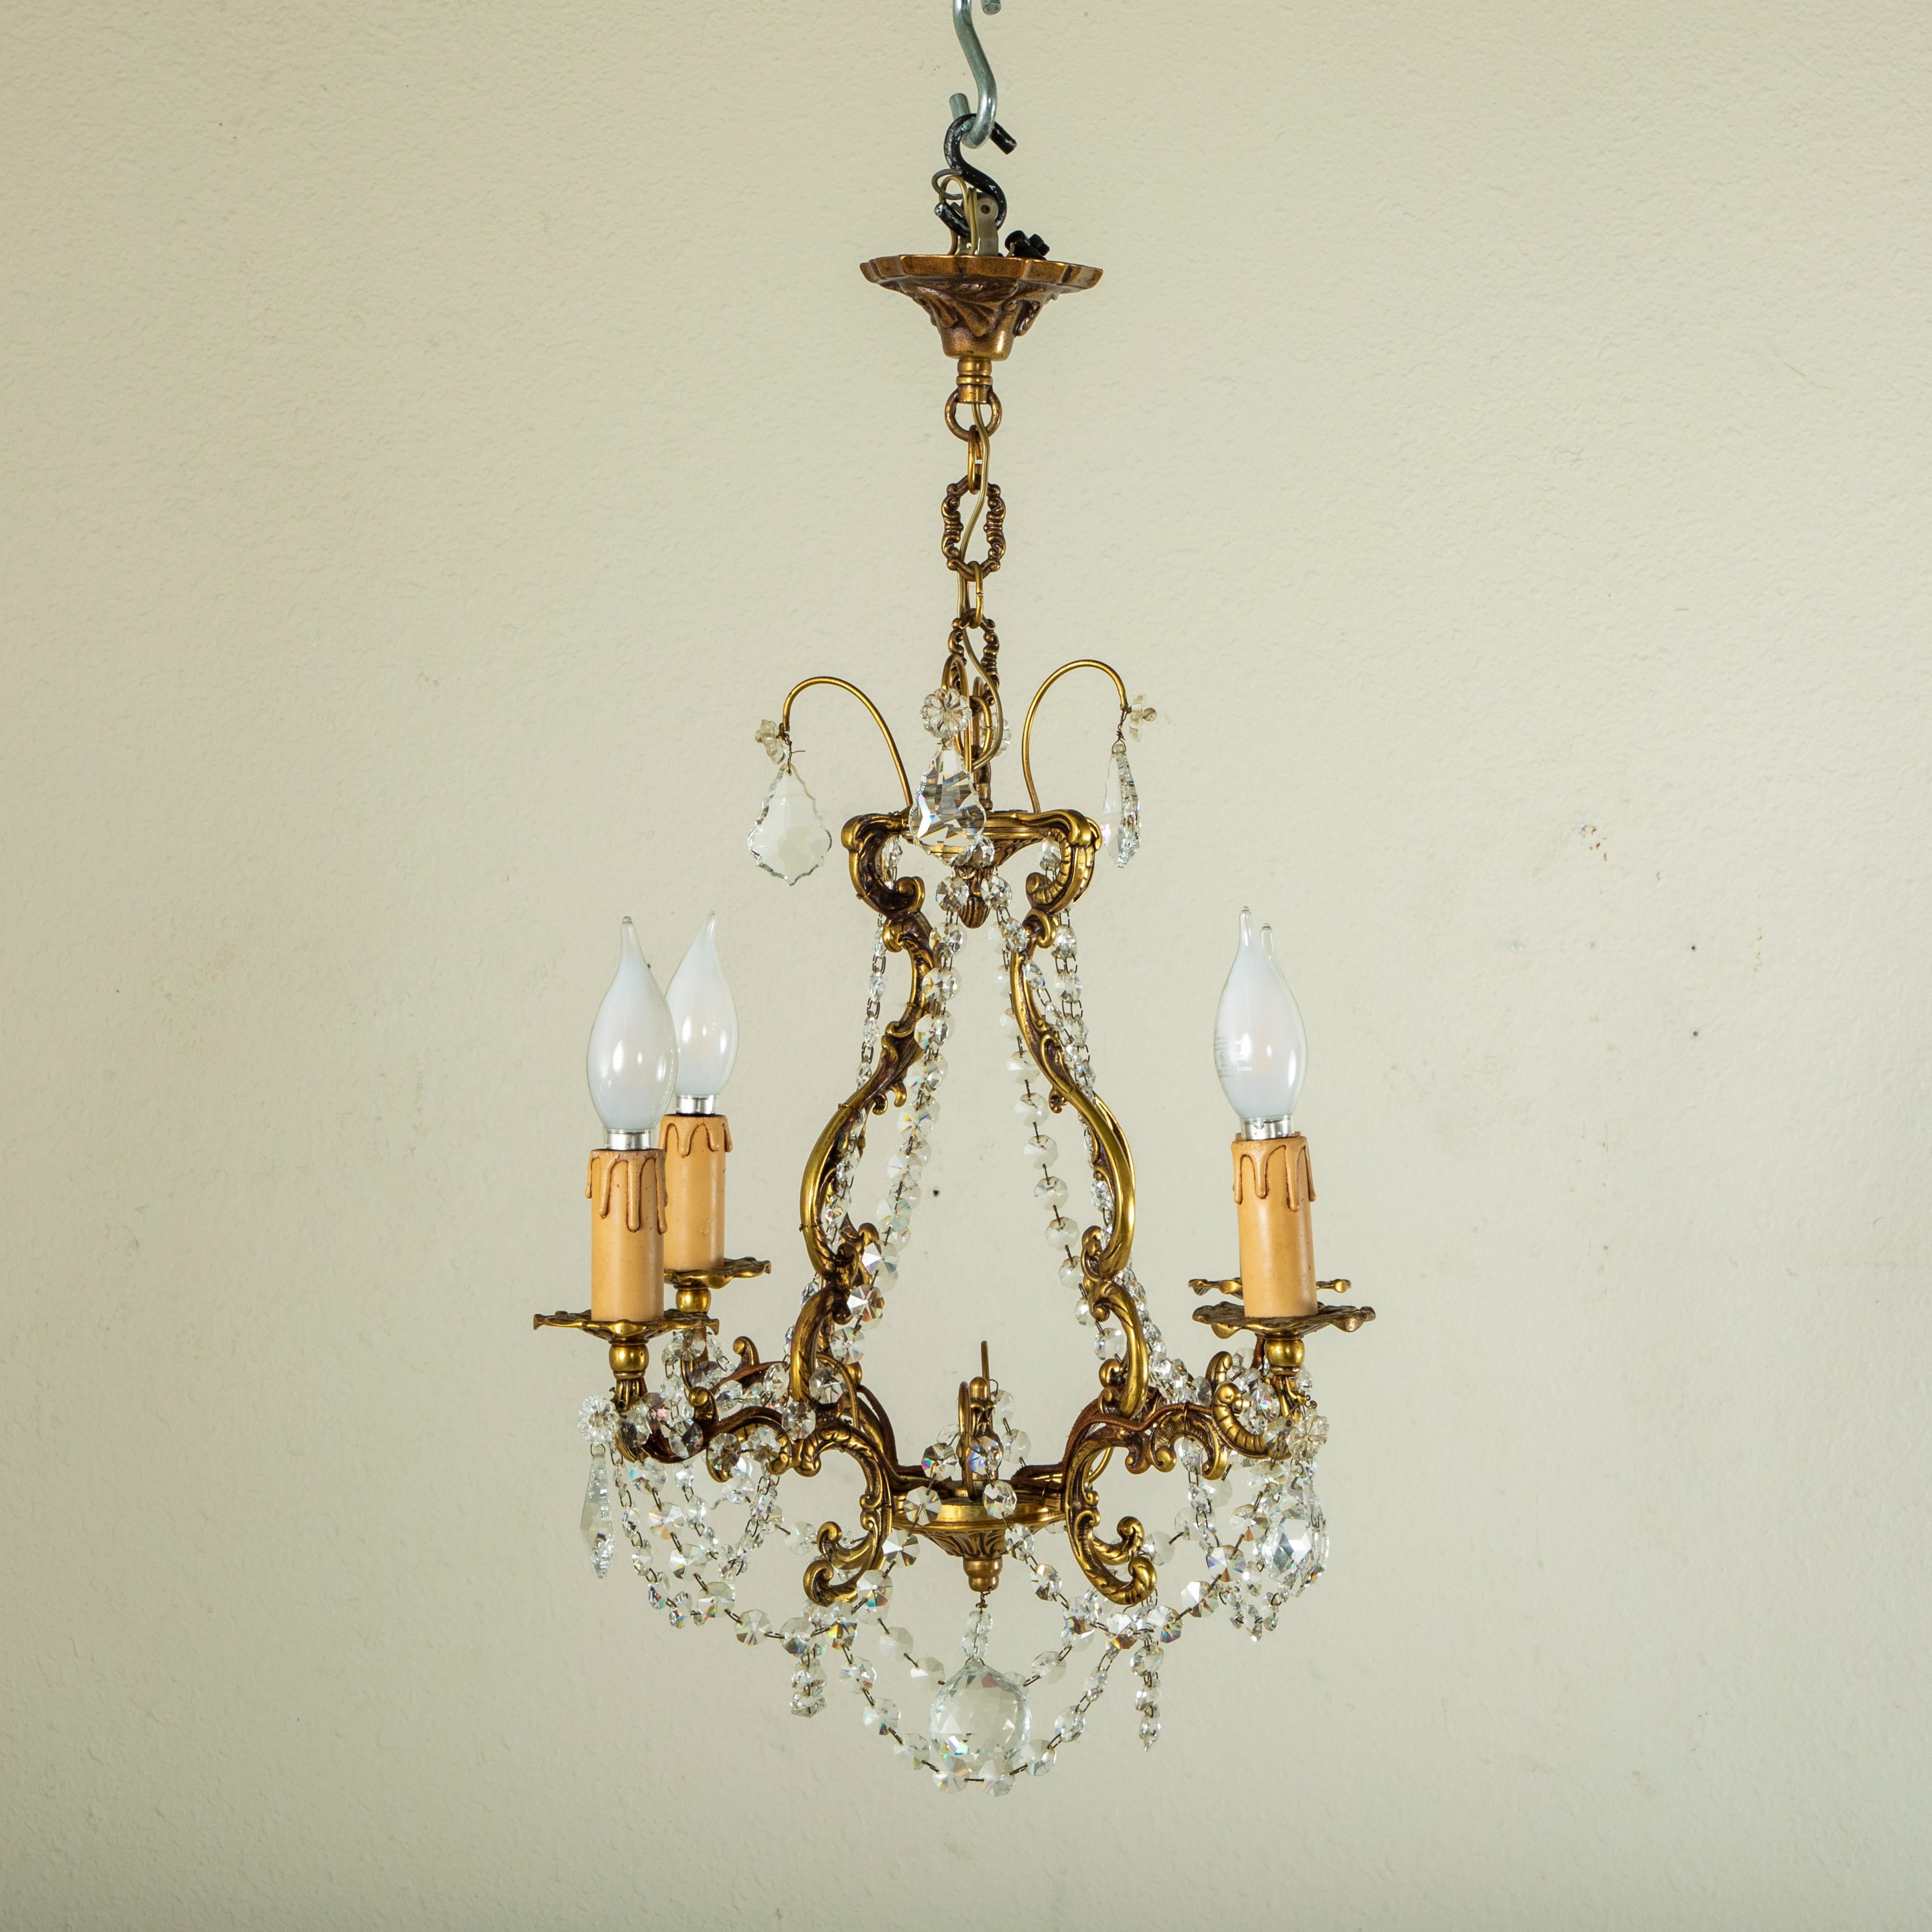 This small scale bronze chandelier features gadrooned strands of Strass crystals and four elegantly curved arms detailed with Strass crystal pendaloques. Each arm is fitted with a bronze bobeche that sits at the base of each of its four faux candle